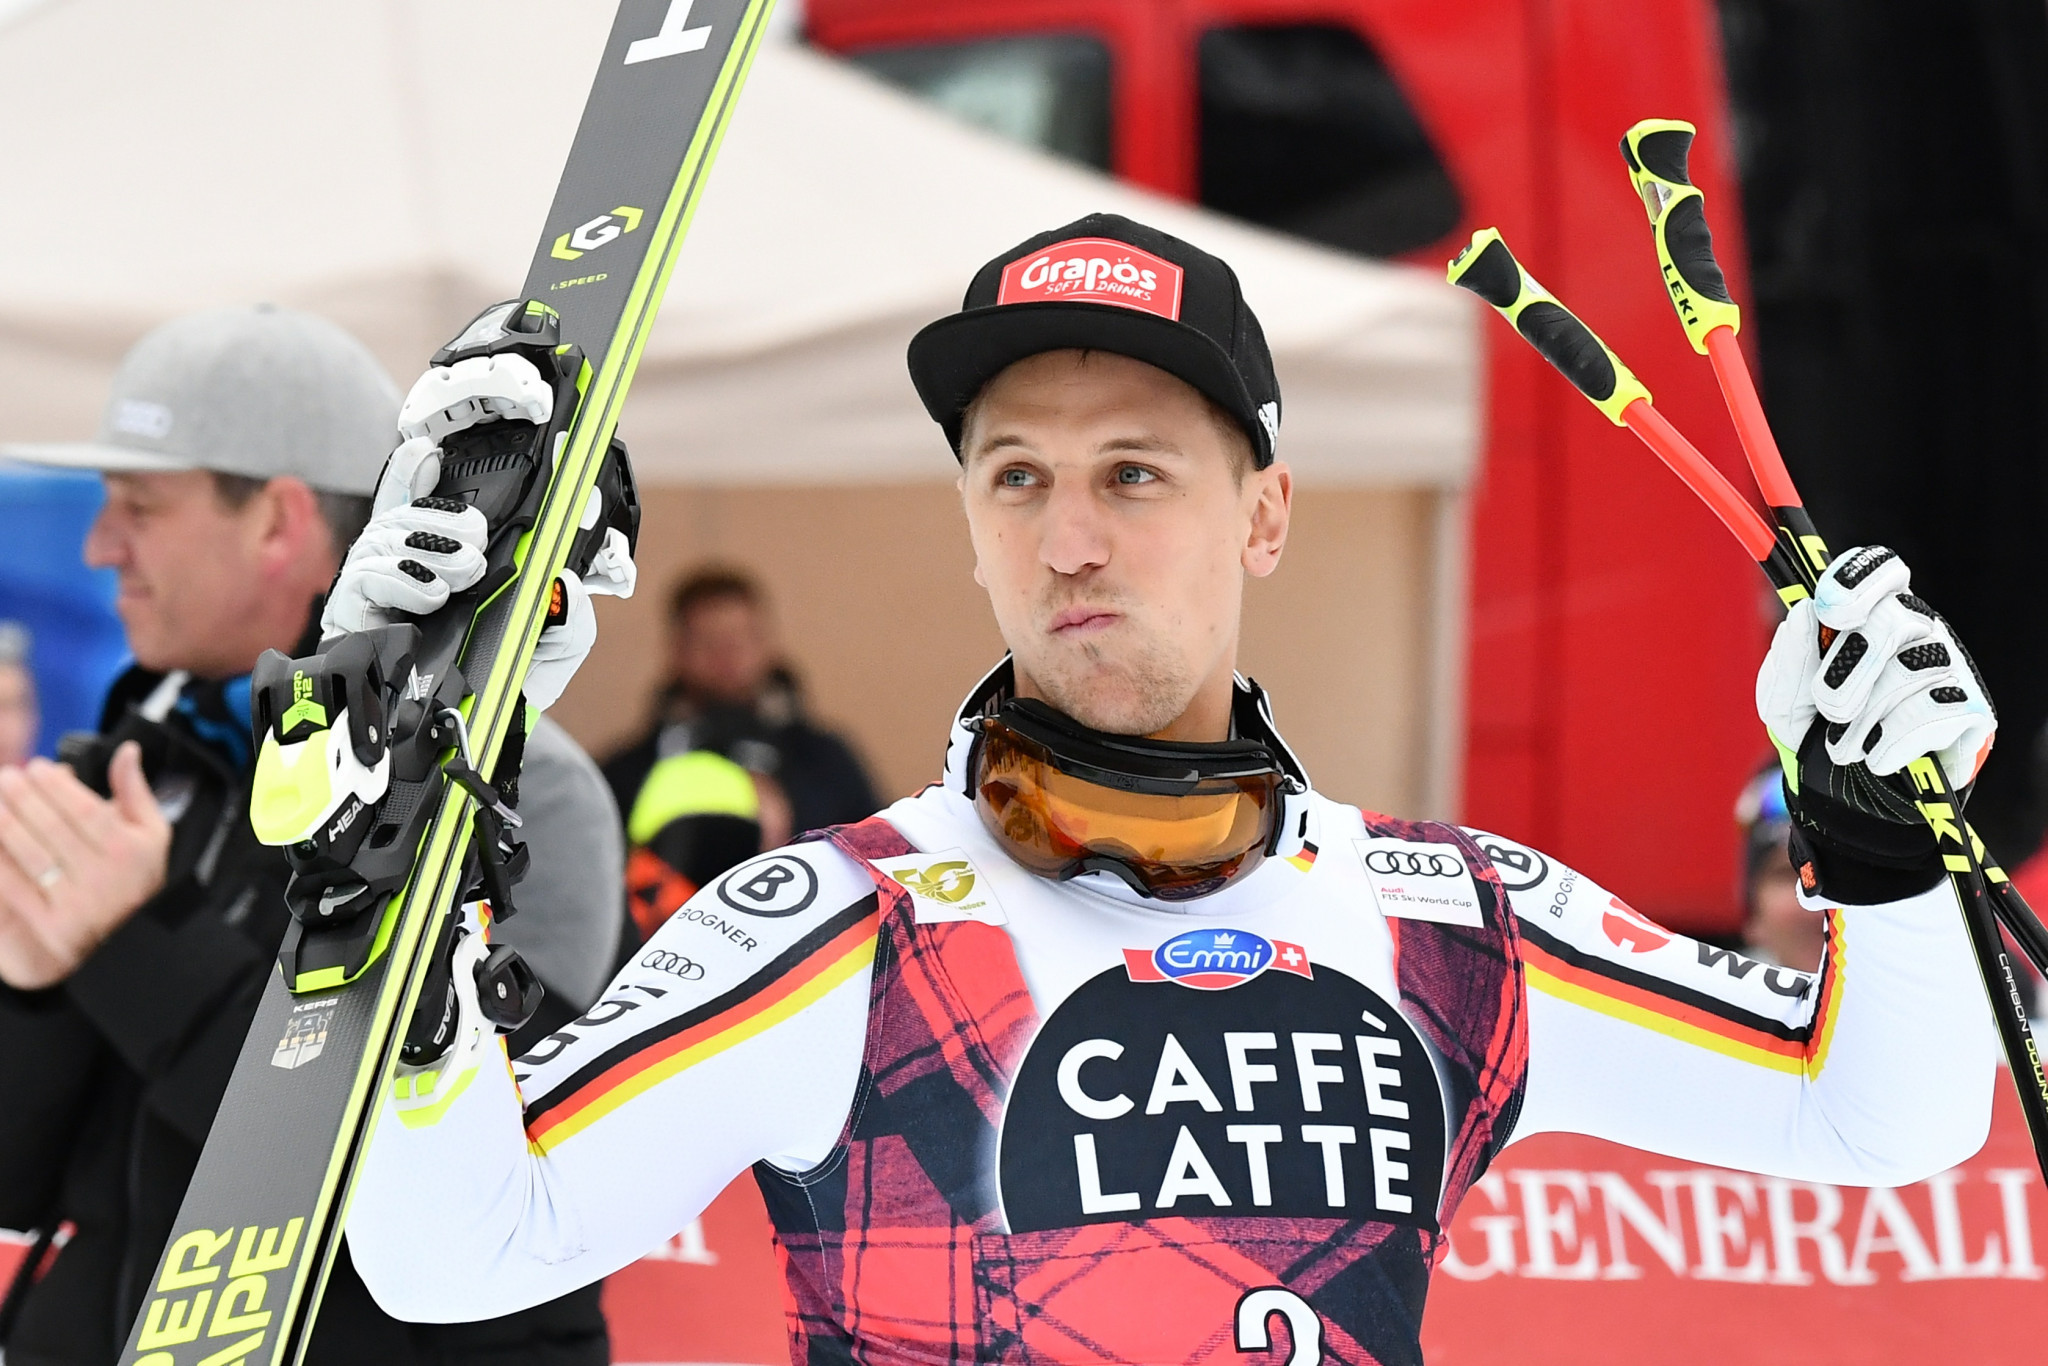 Germany's Ferstl wins weather-affected super-G at FIS Alpine Skiing World Cup in Val Gardena